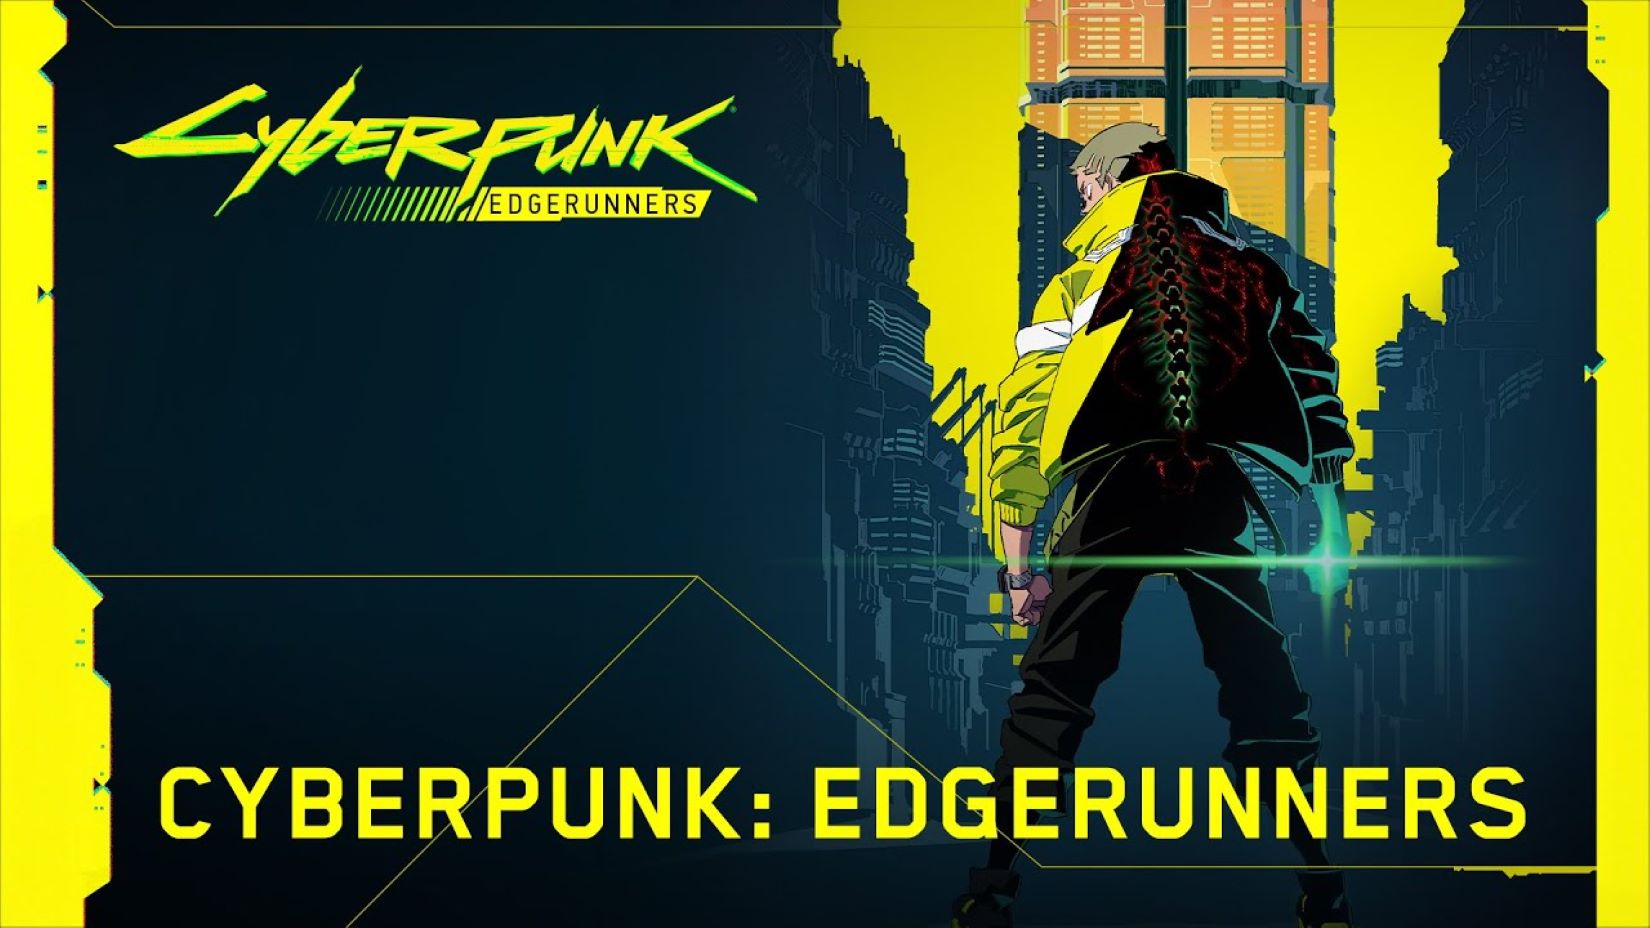 Cyberpunk 2077 Delayed Further but Here's a New Trailer and an Anime Series  – TechAcute